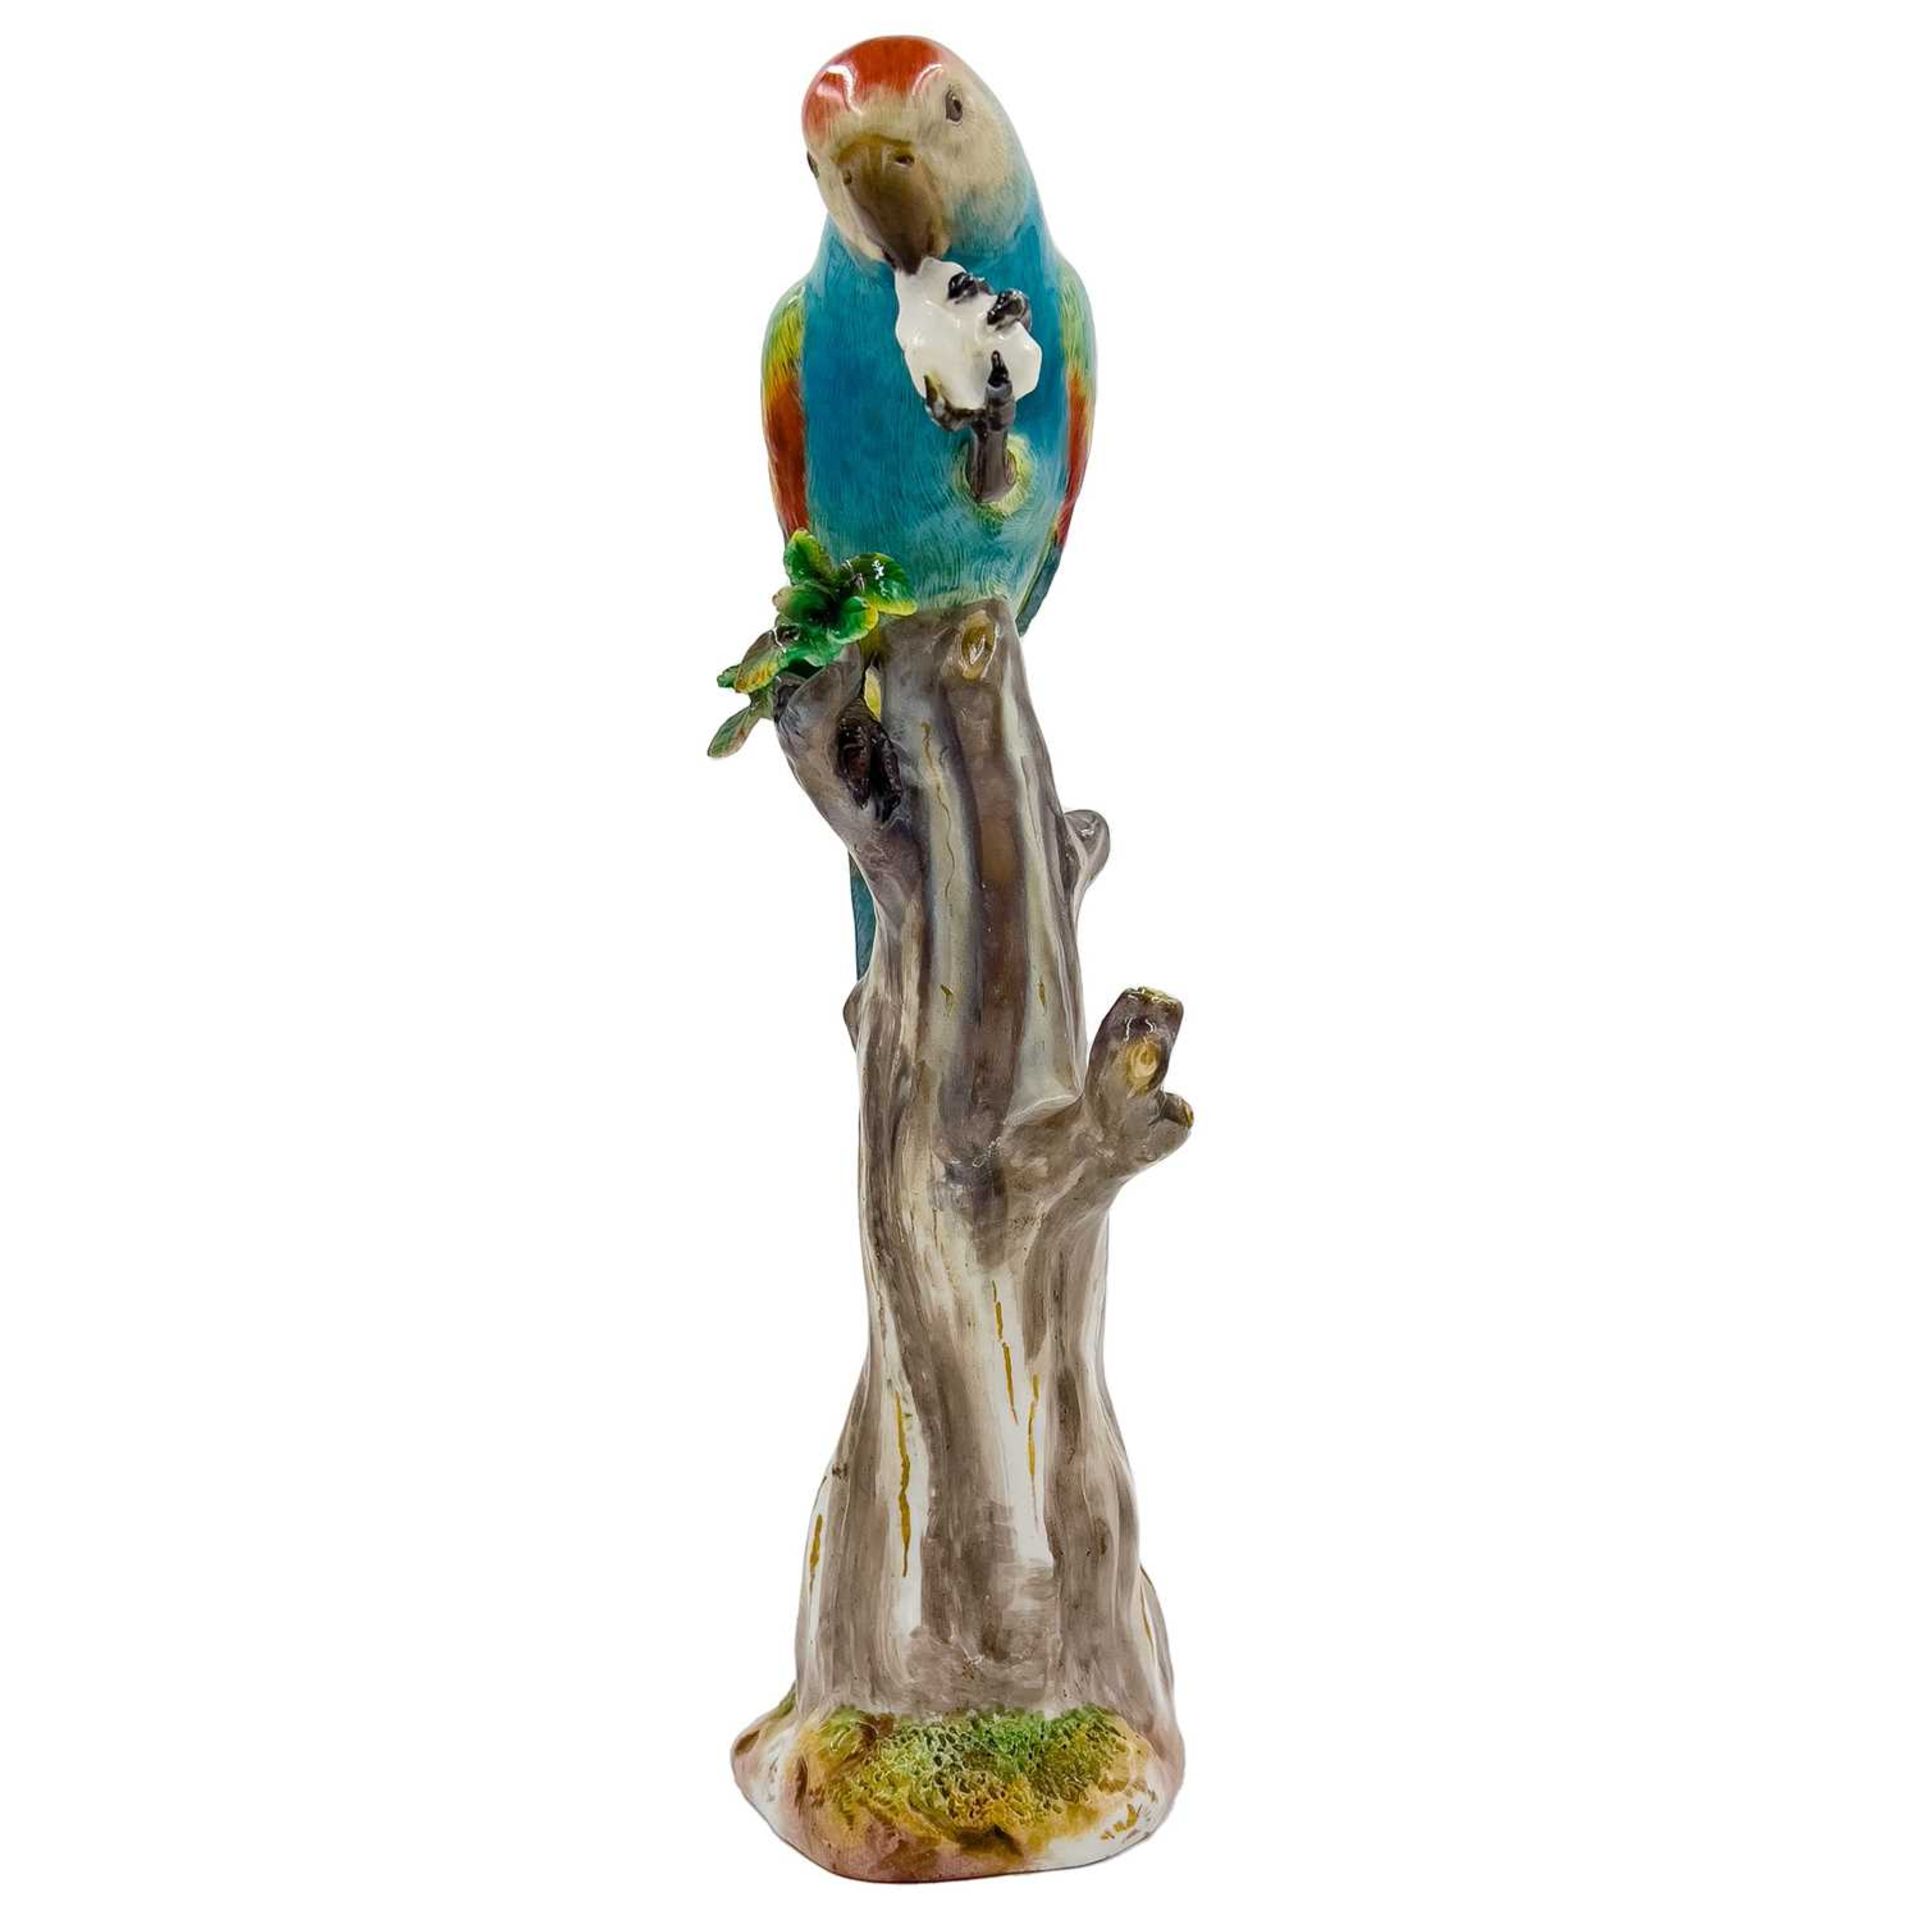 MEISSEN: A 19TH CENTURY PORCELAIN MODEL OF A PARROT EATING FRUIT - Image 6 of 7